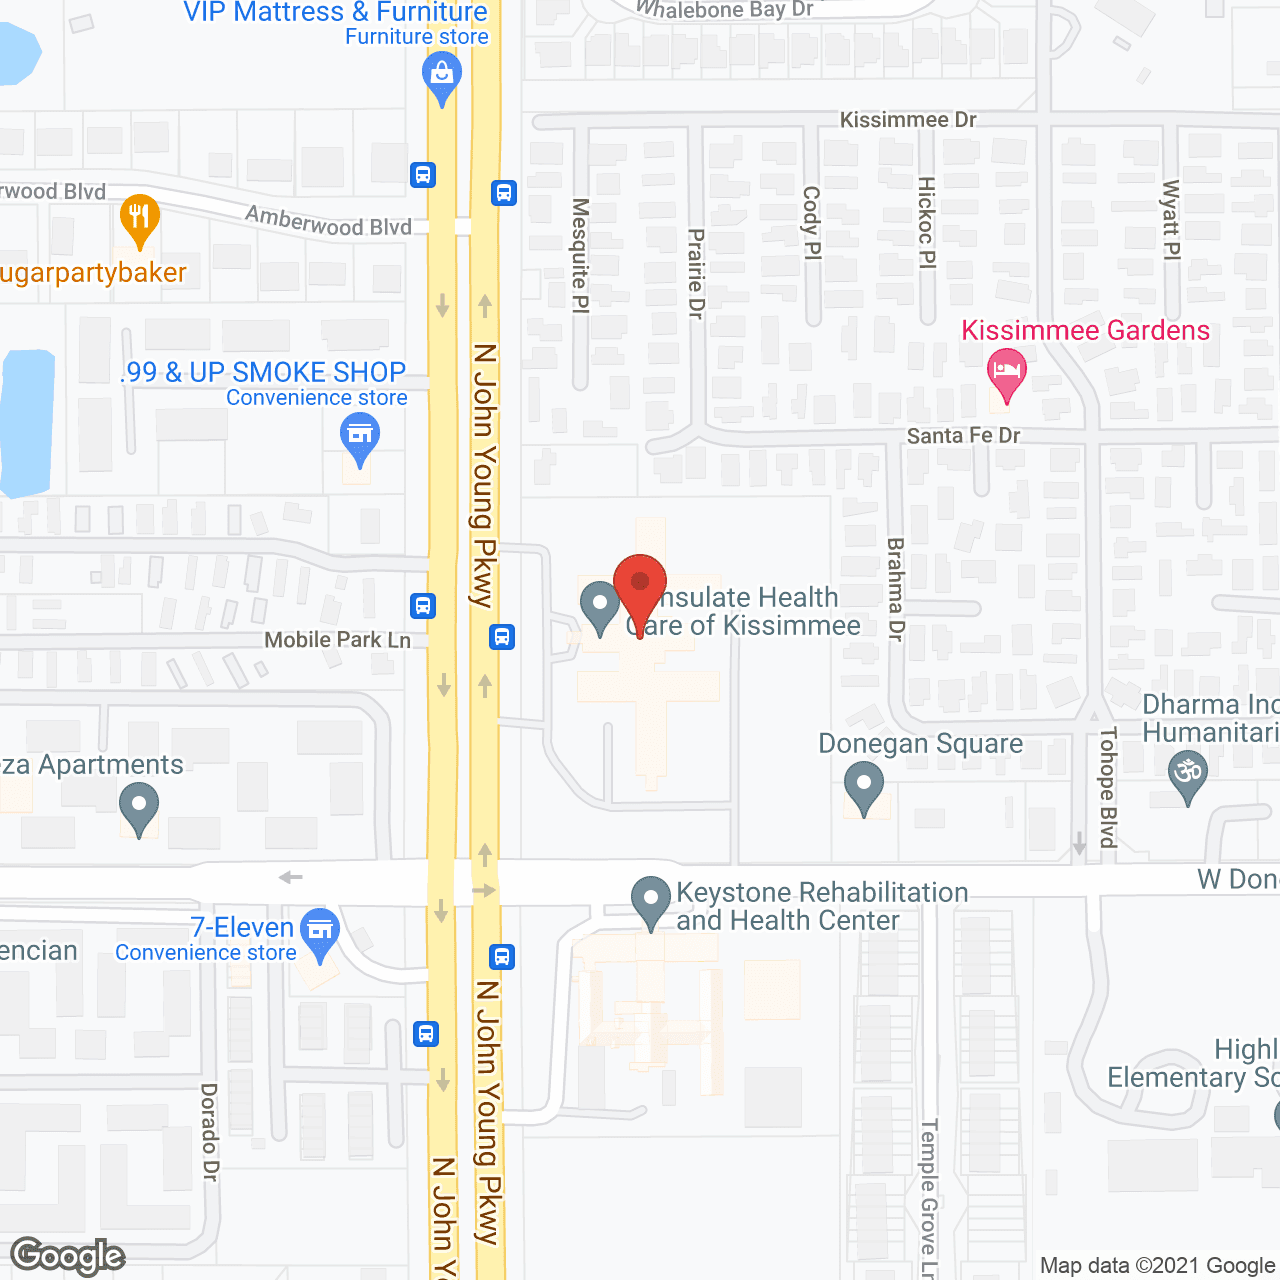 Consulate Health Care of Kissimmee in google map